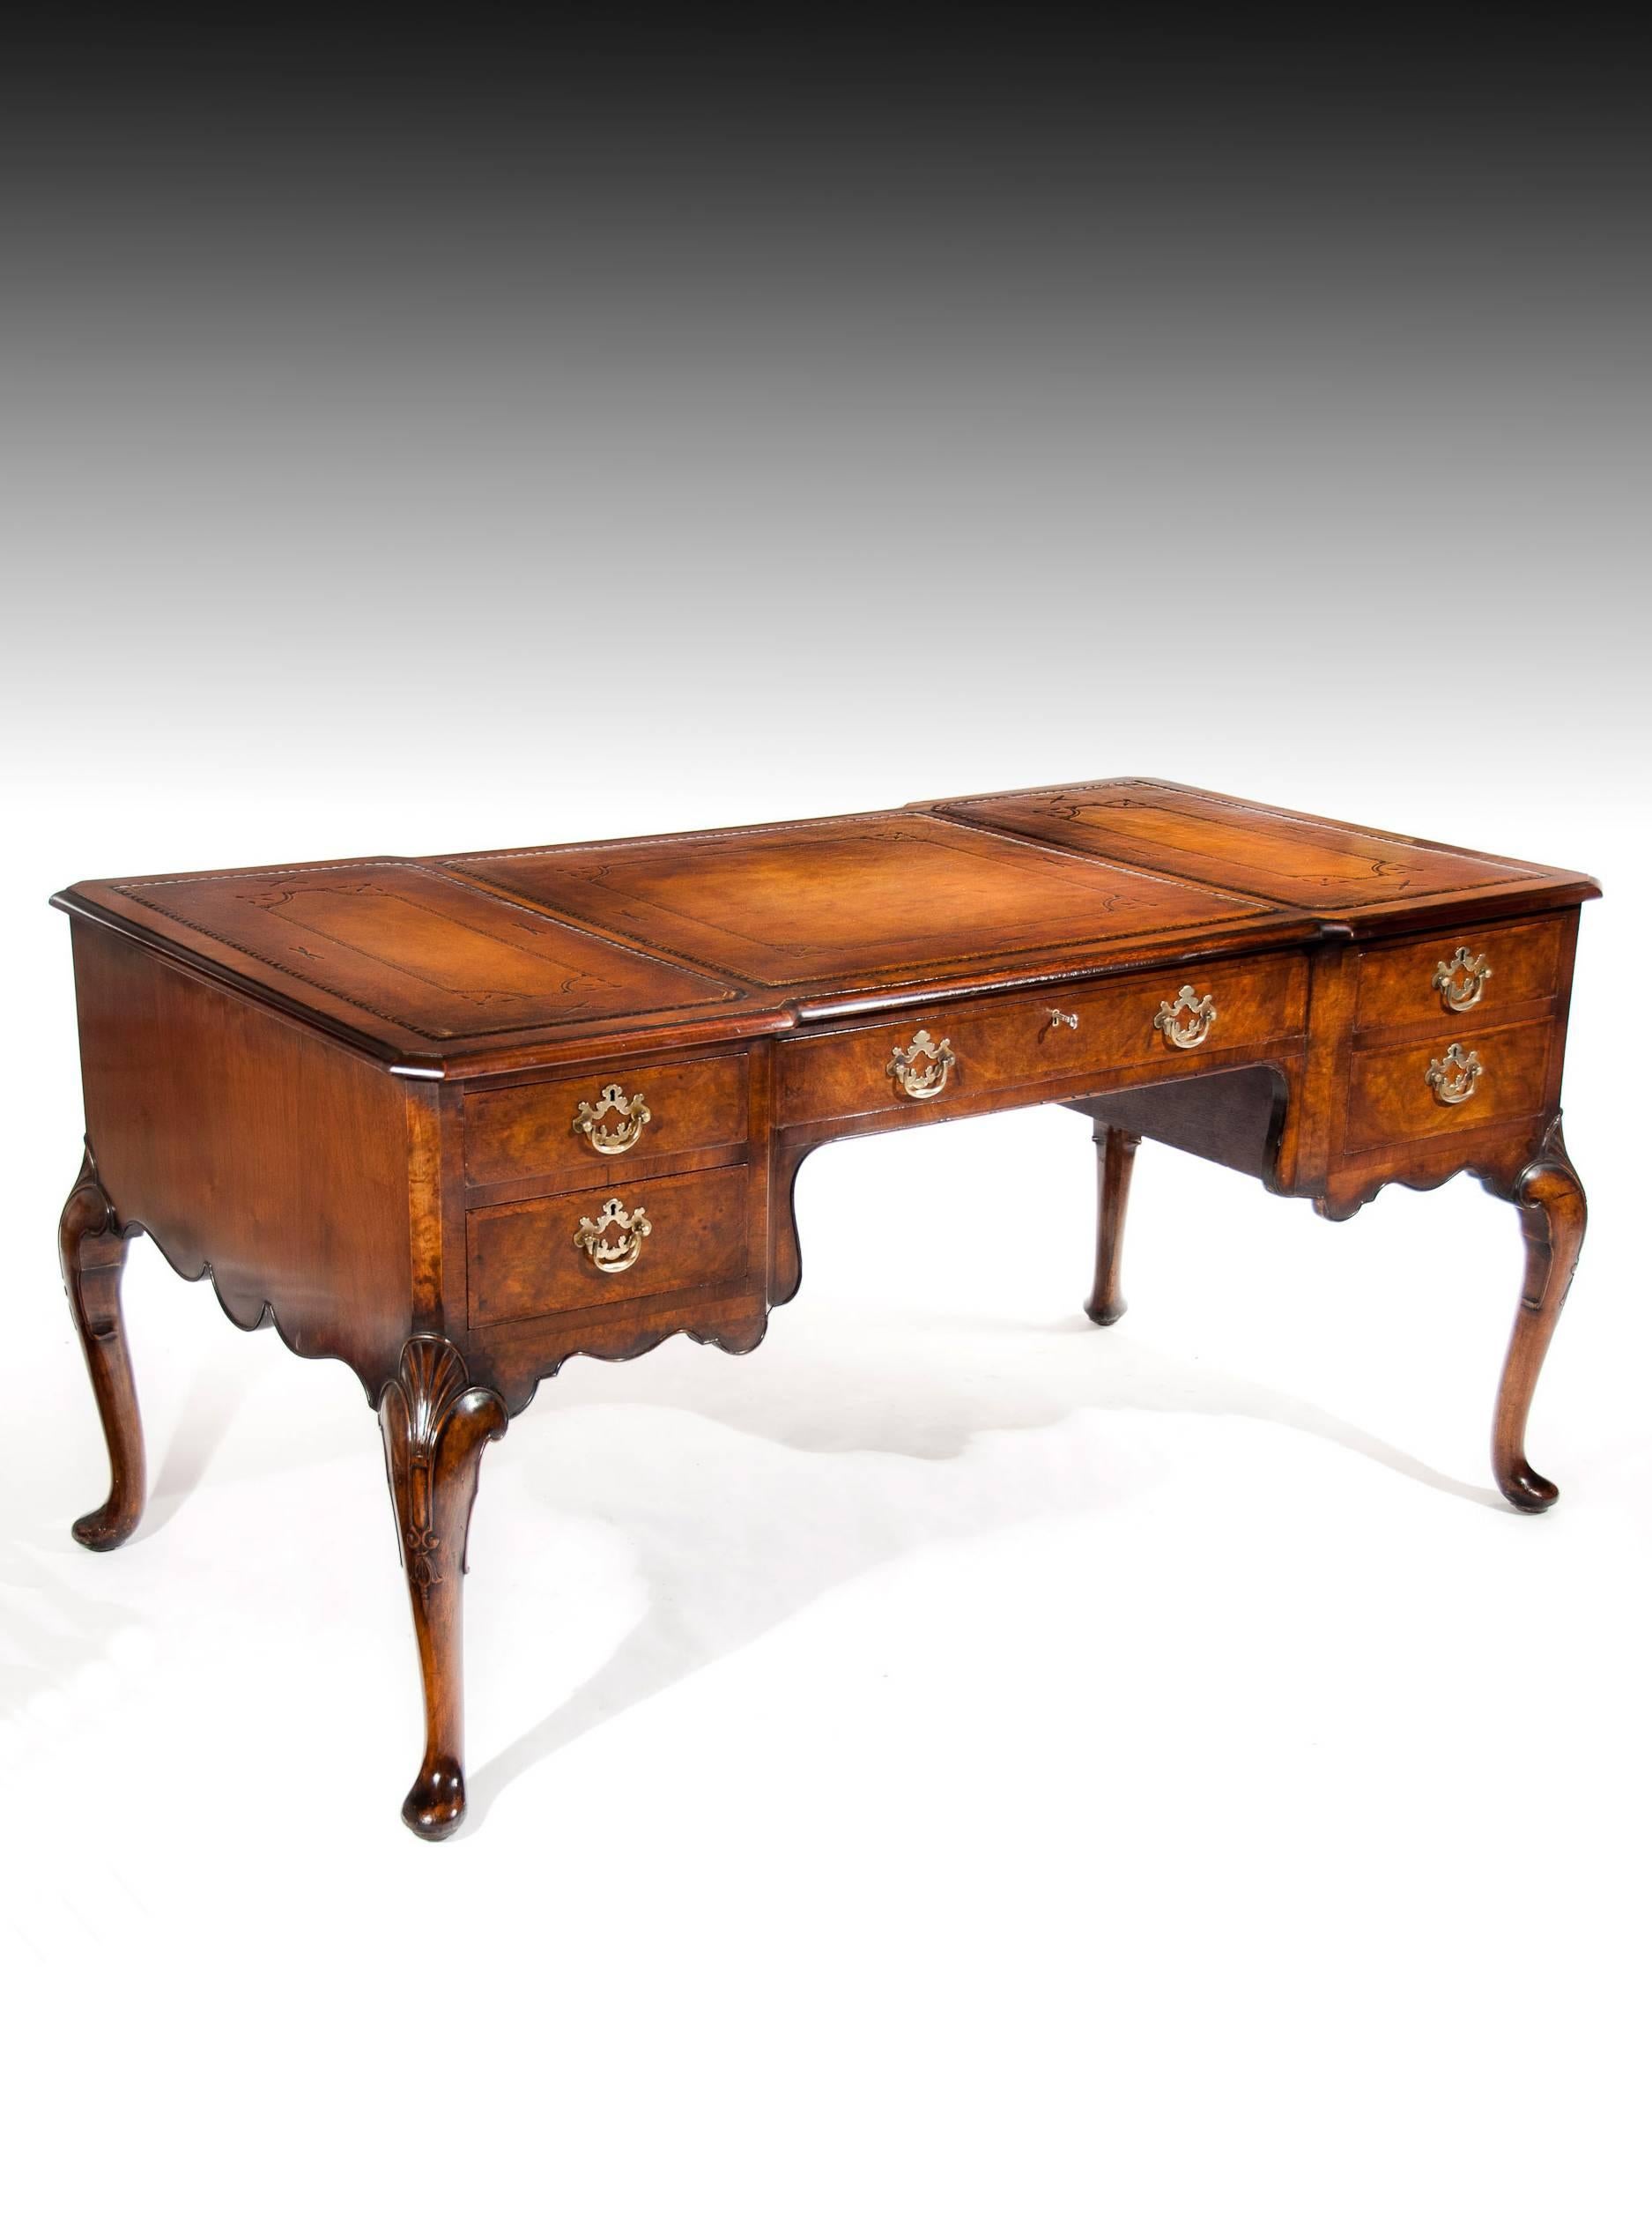 A very attractive burr walnut breakfront partners writing desk of good colour dating to circa 1900-1920s.
This antique desk has been constructed to the highest standard having choice cuts of burr walnut veneer good oak sided draw linings. This